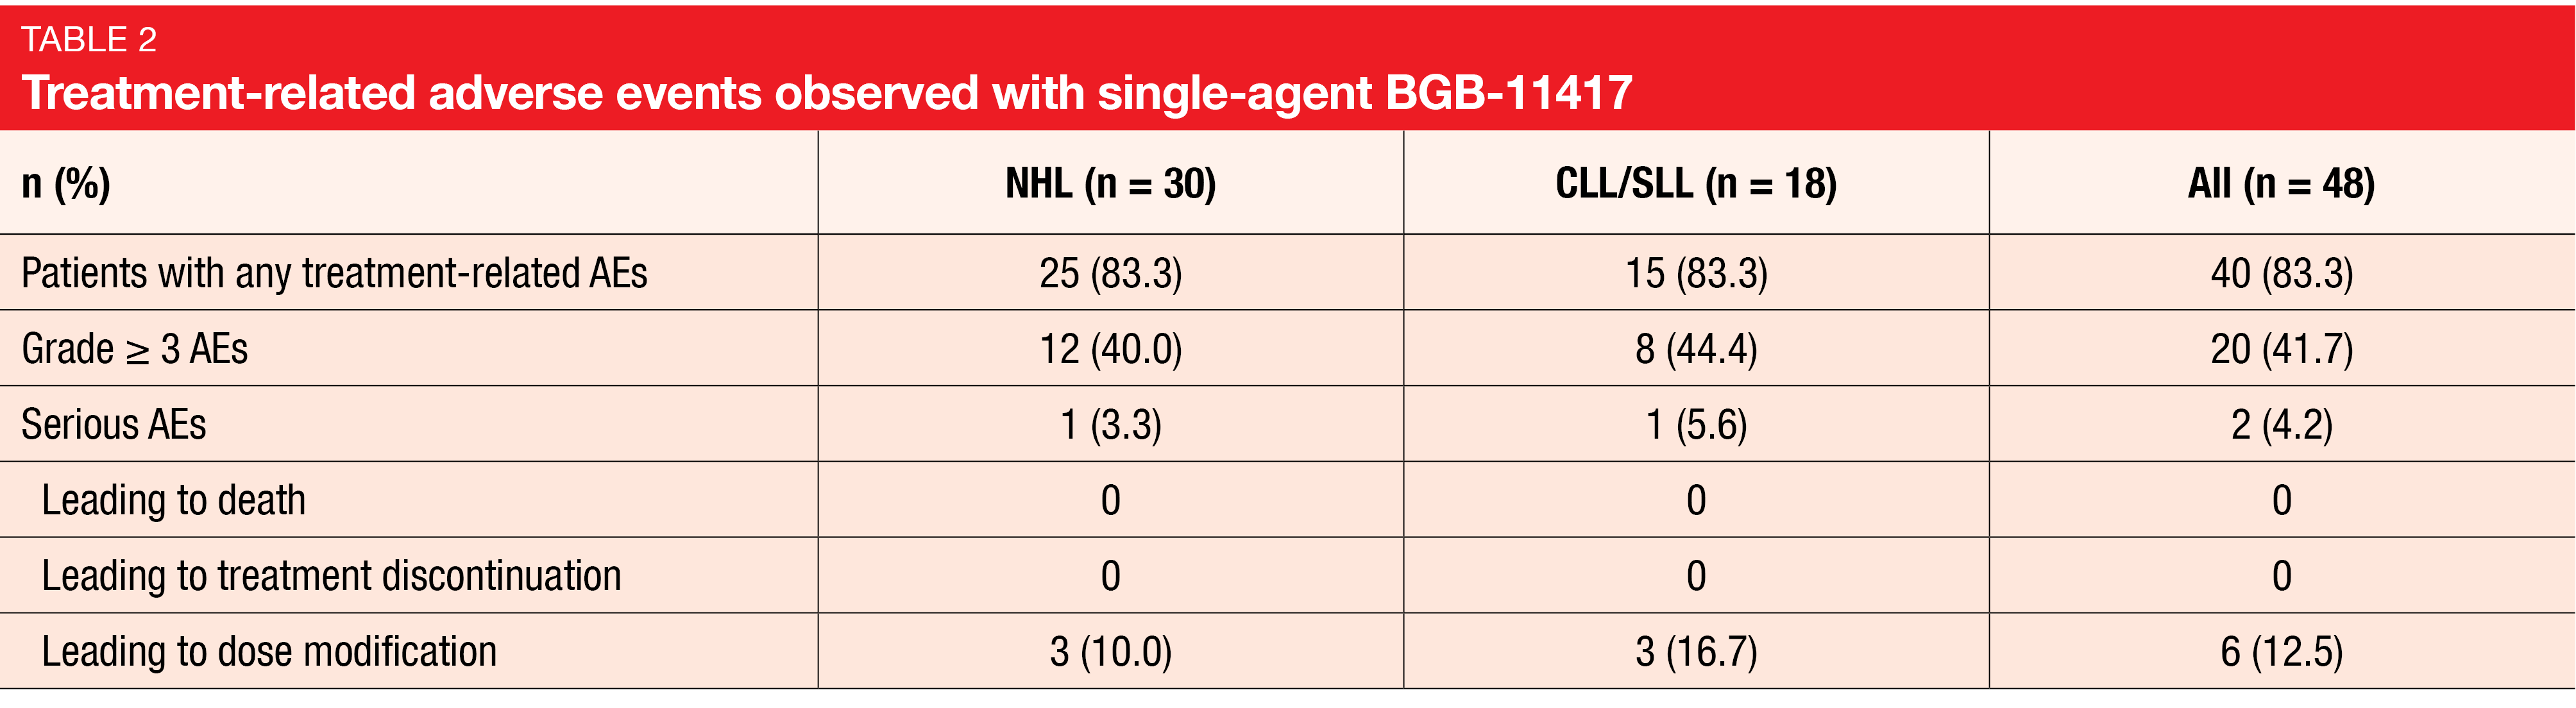 Table 2 Treatment-related adverse events observed with single-agent BGB-11417